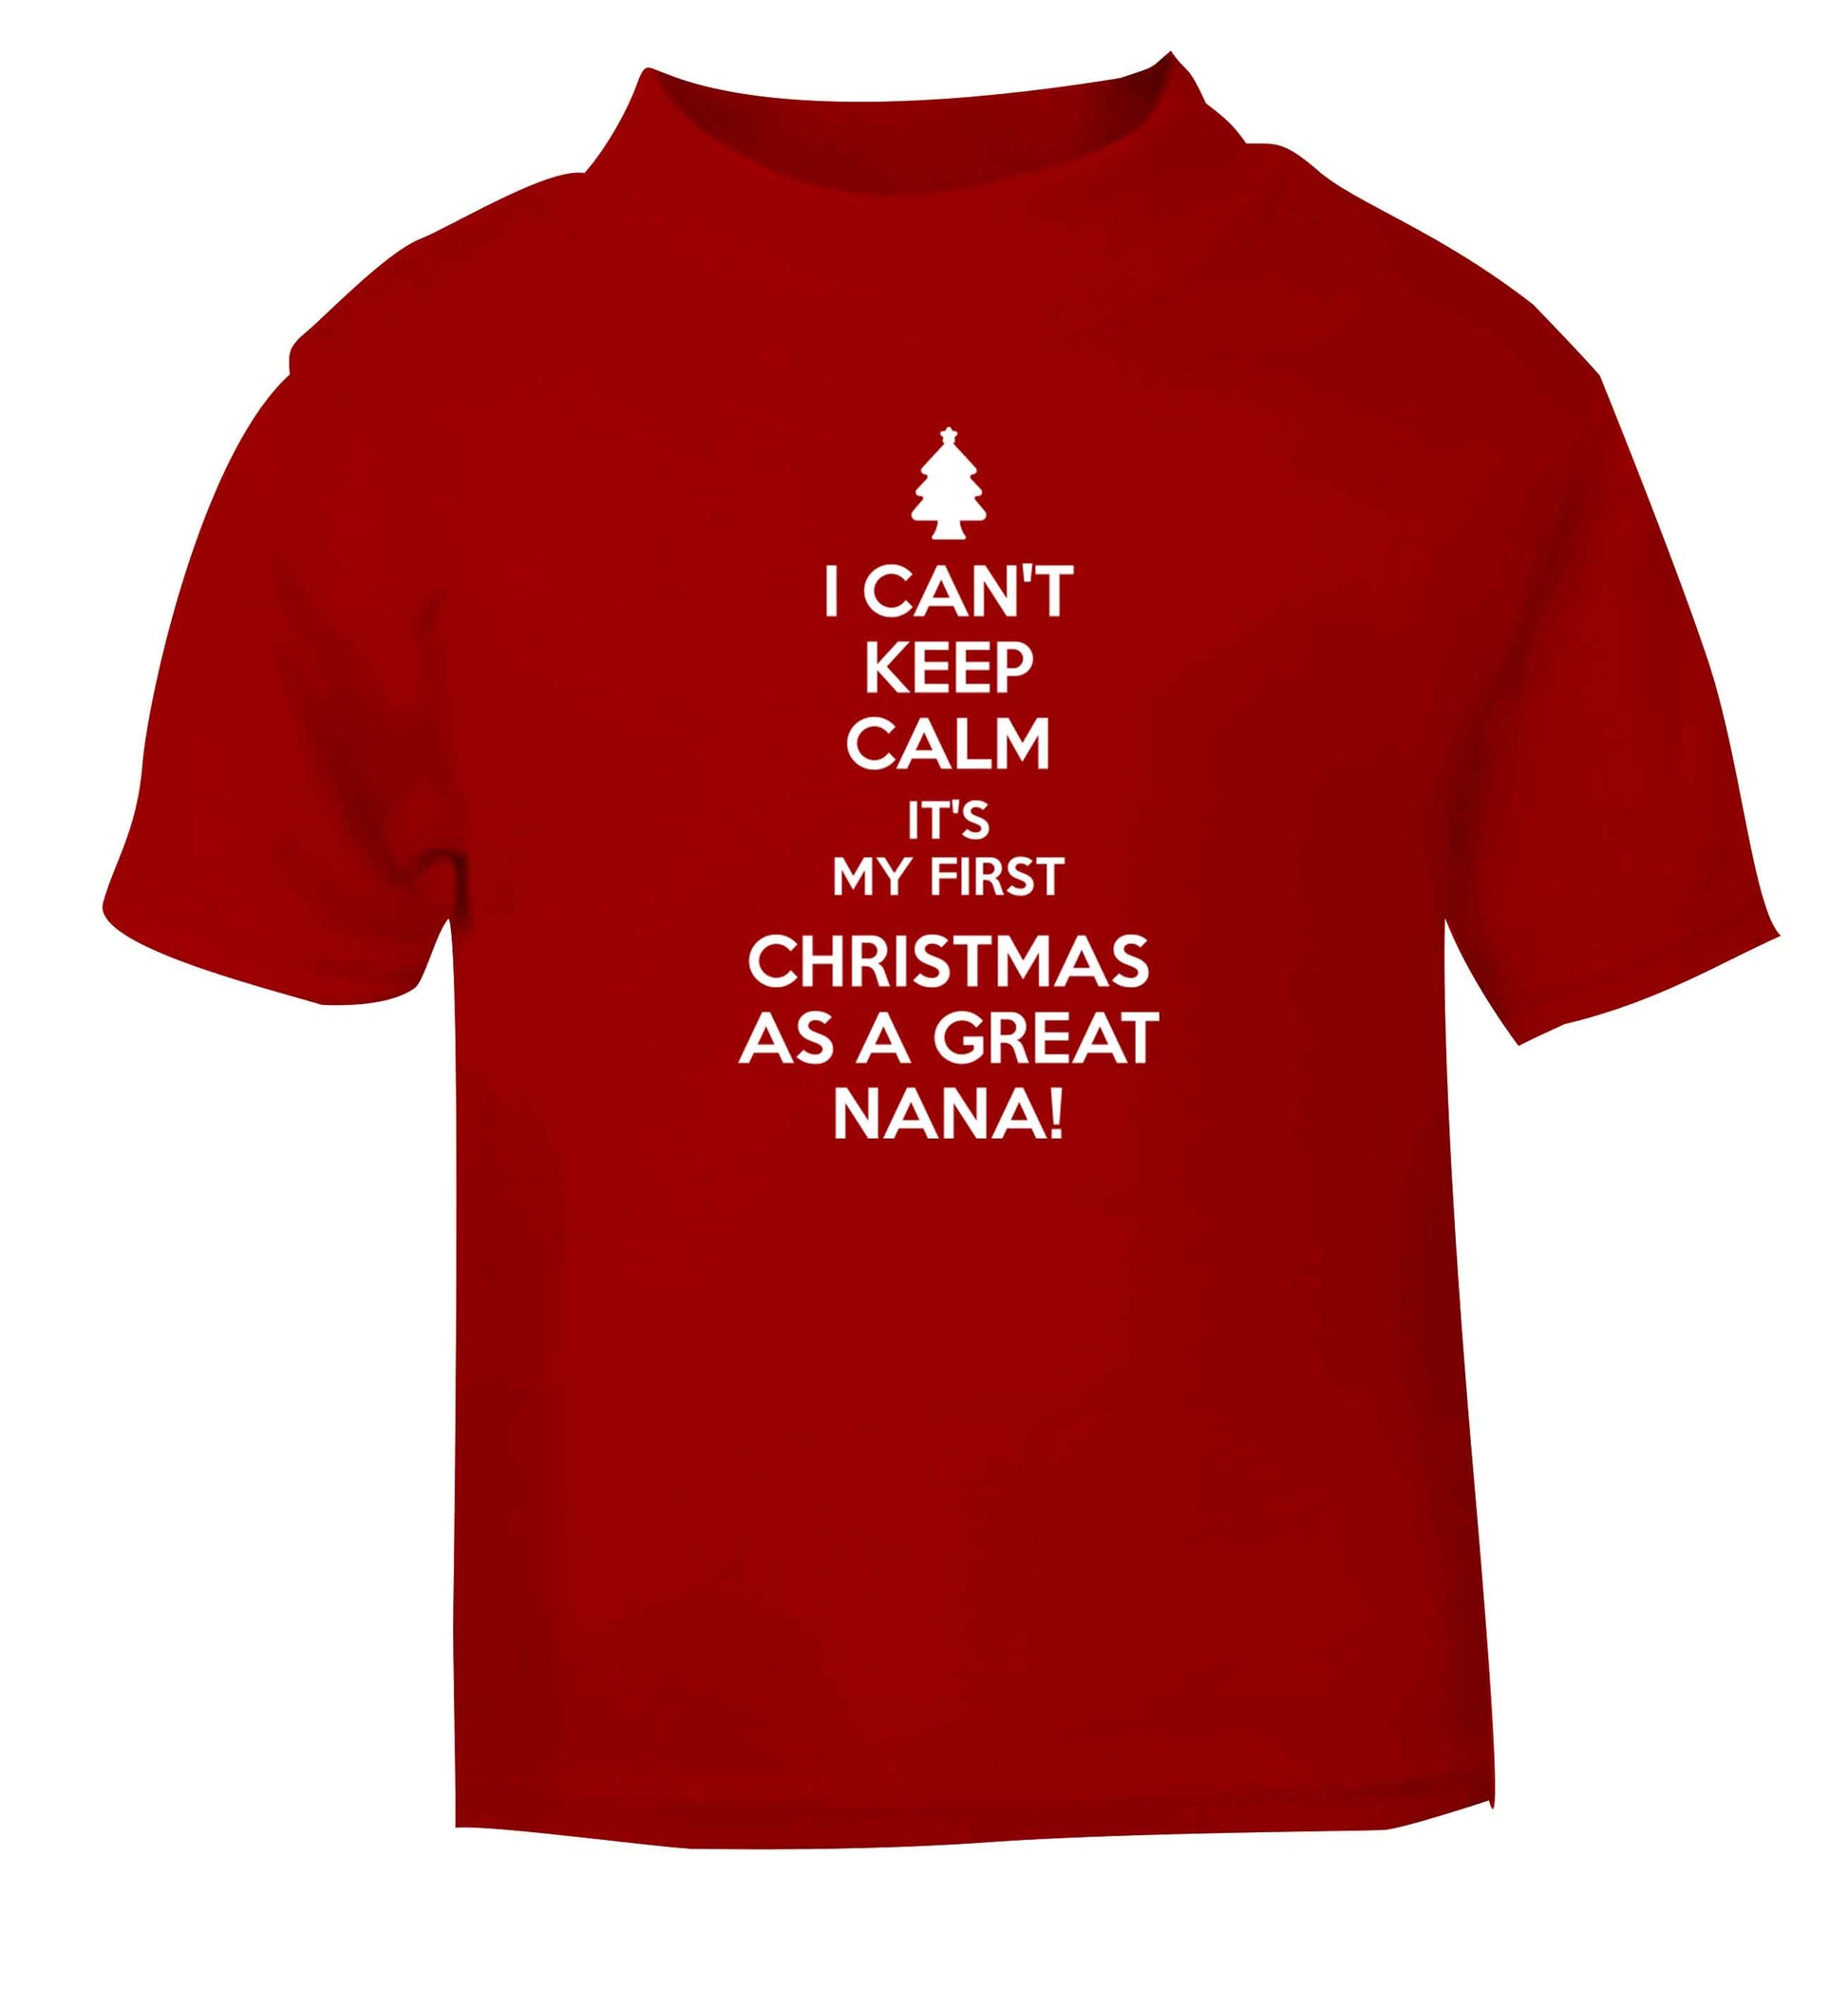 I can't keep calm it's my first Christmas as a great nana! red Baby Toddler Tshirt 2 Years